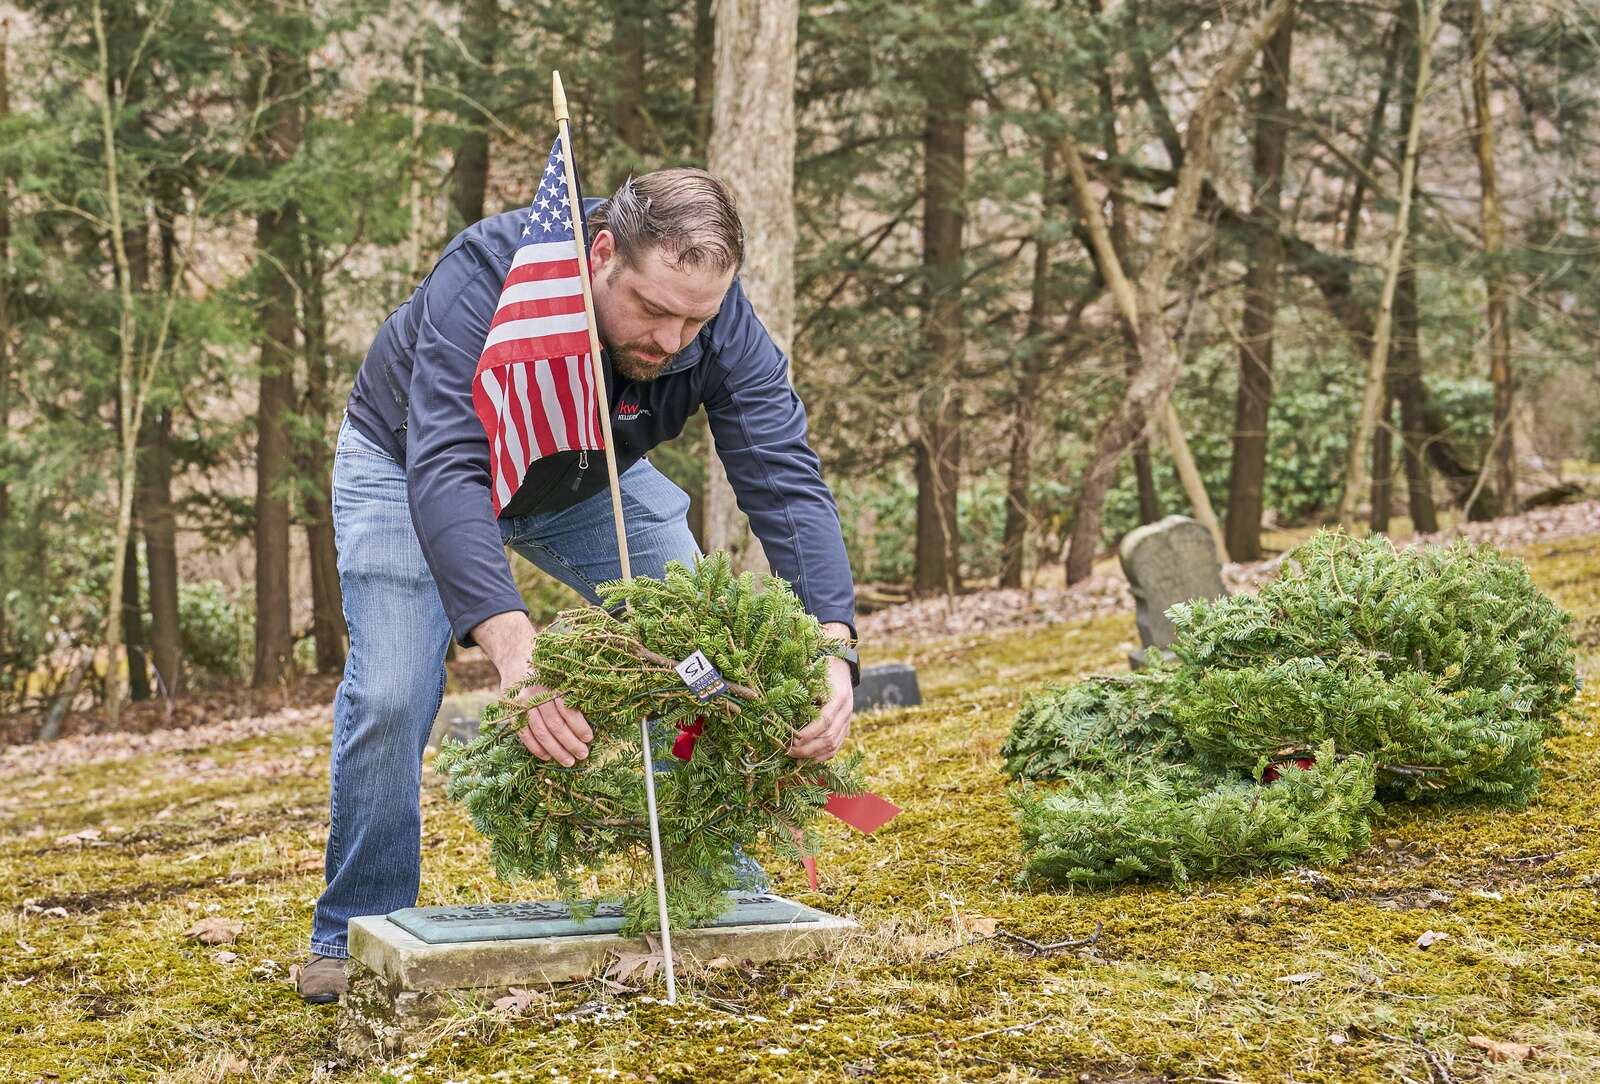 David Rolley places a wreath at the gravesite of a U.S. veteran